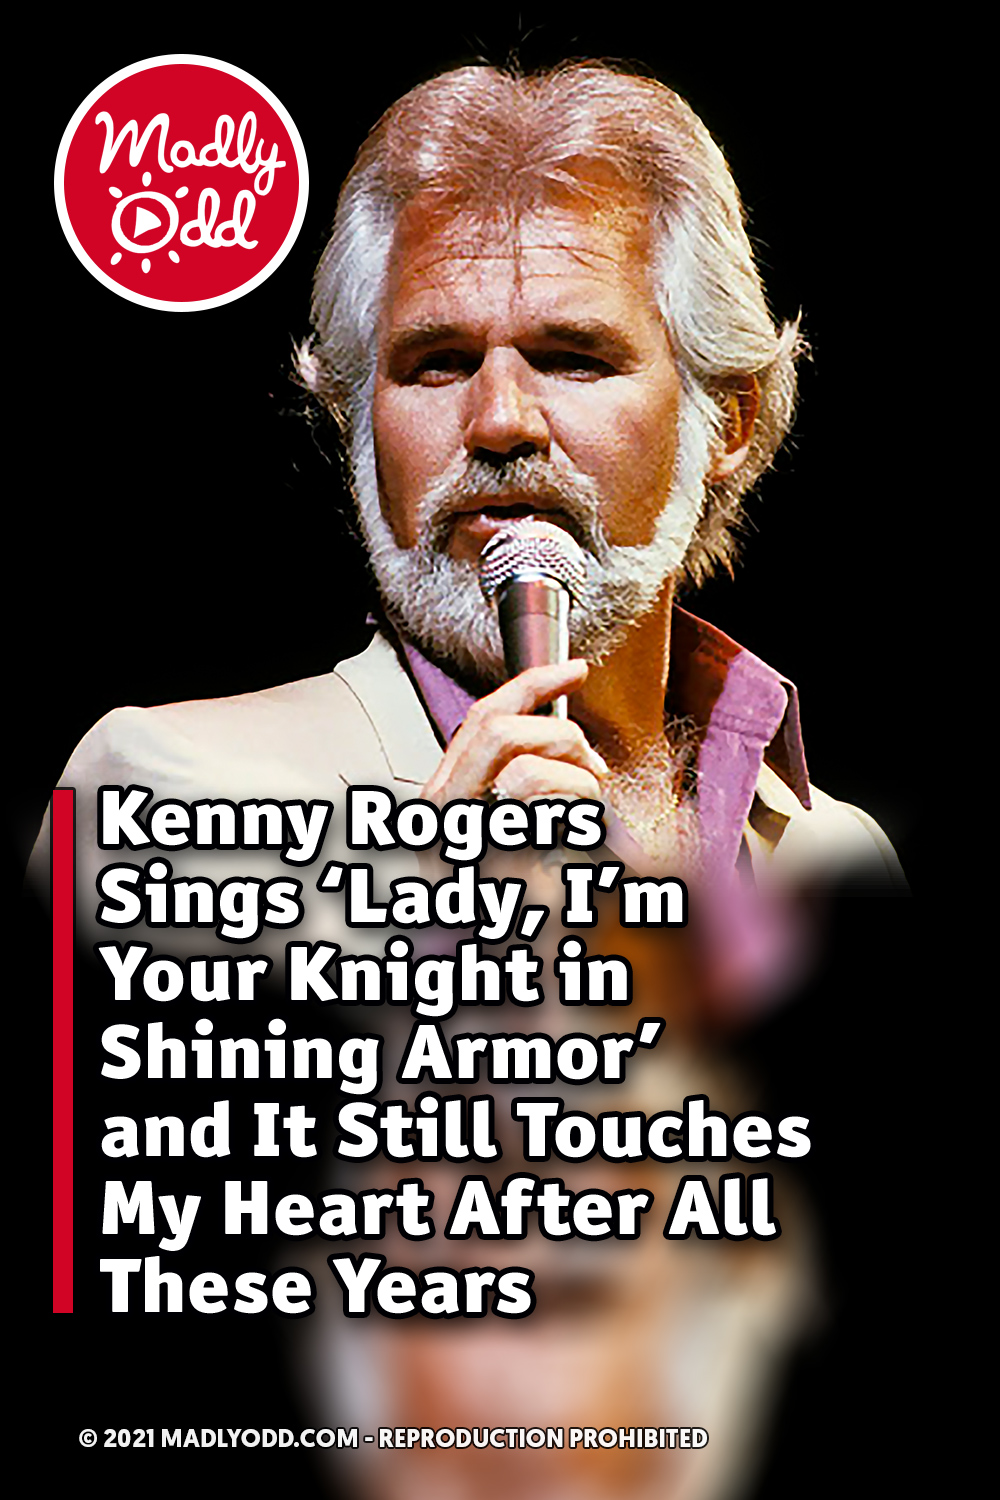 Kenny Rogers Sings \'Lady, I\'m Your Knight in Shining Armor\' and It Still Touches My Heart After All These Years